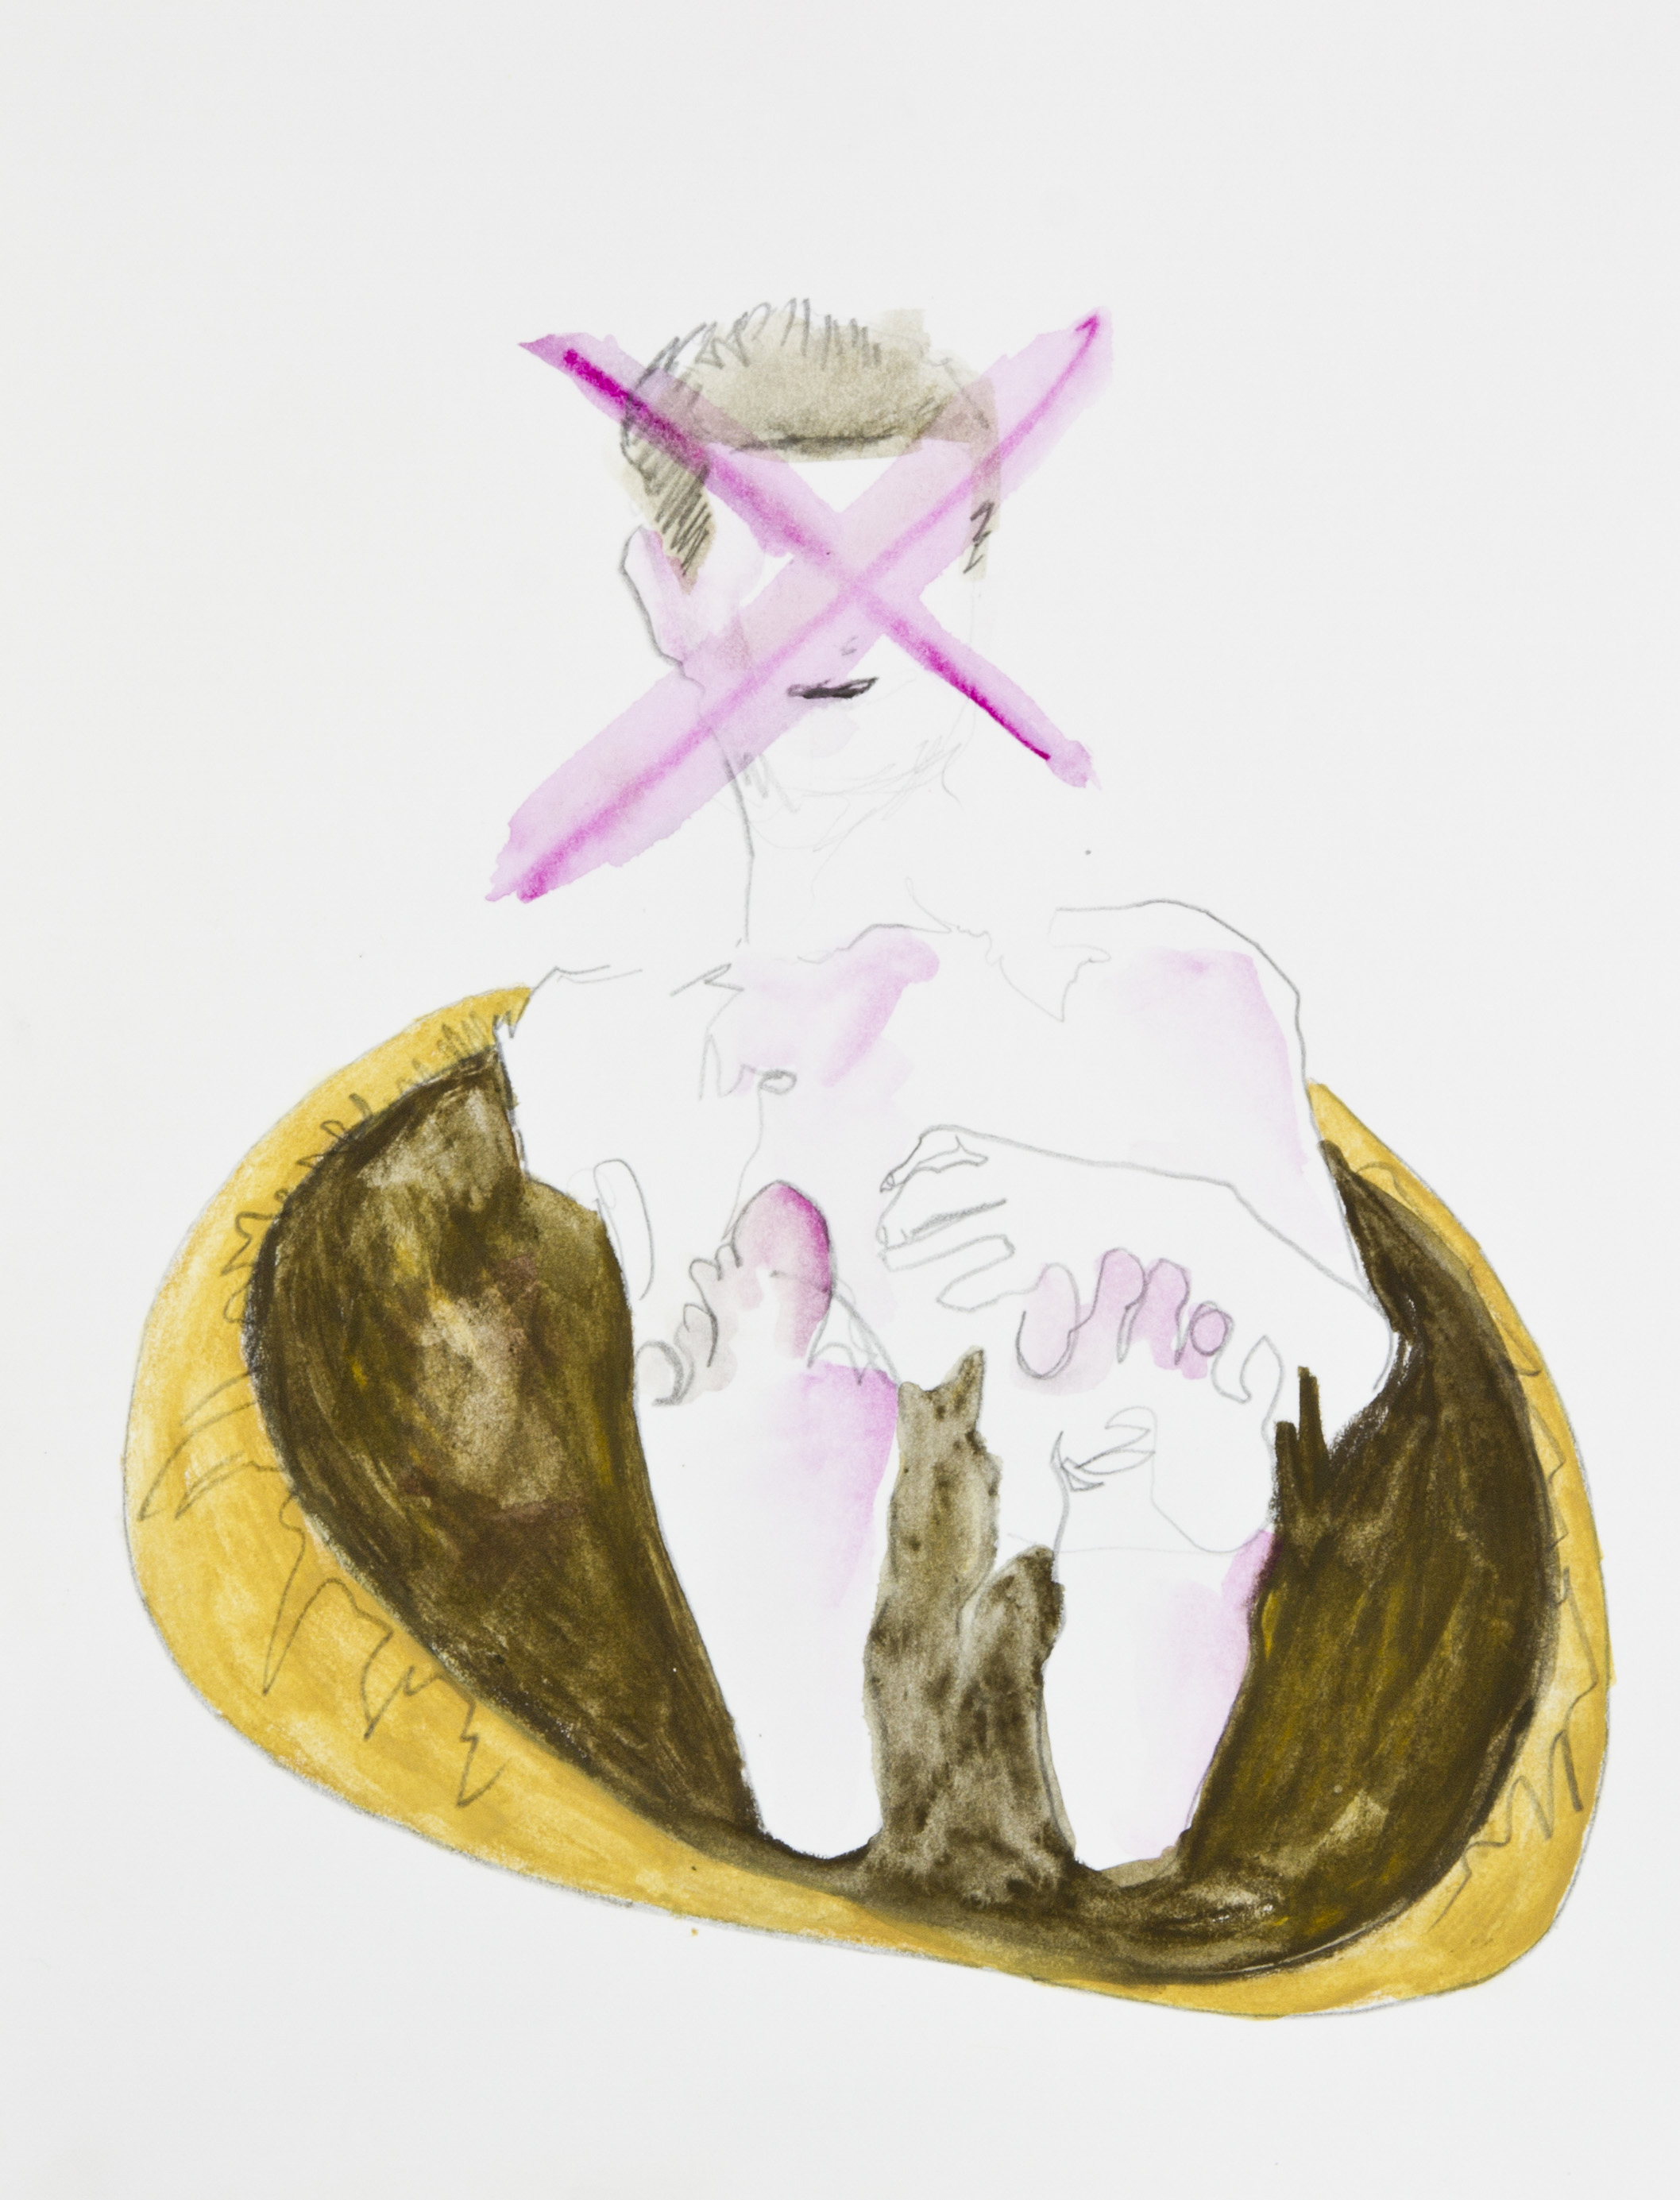 No To The Void 2013, graphite, crayon and watercolor pencil on paper, 11x14 inches